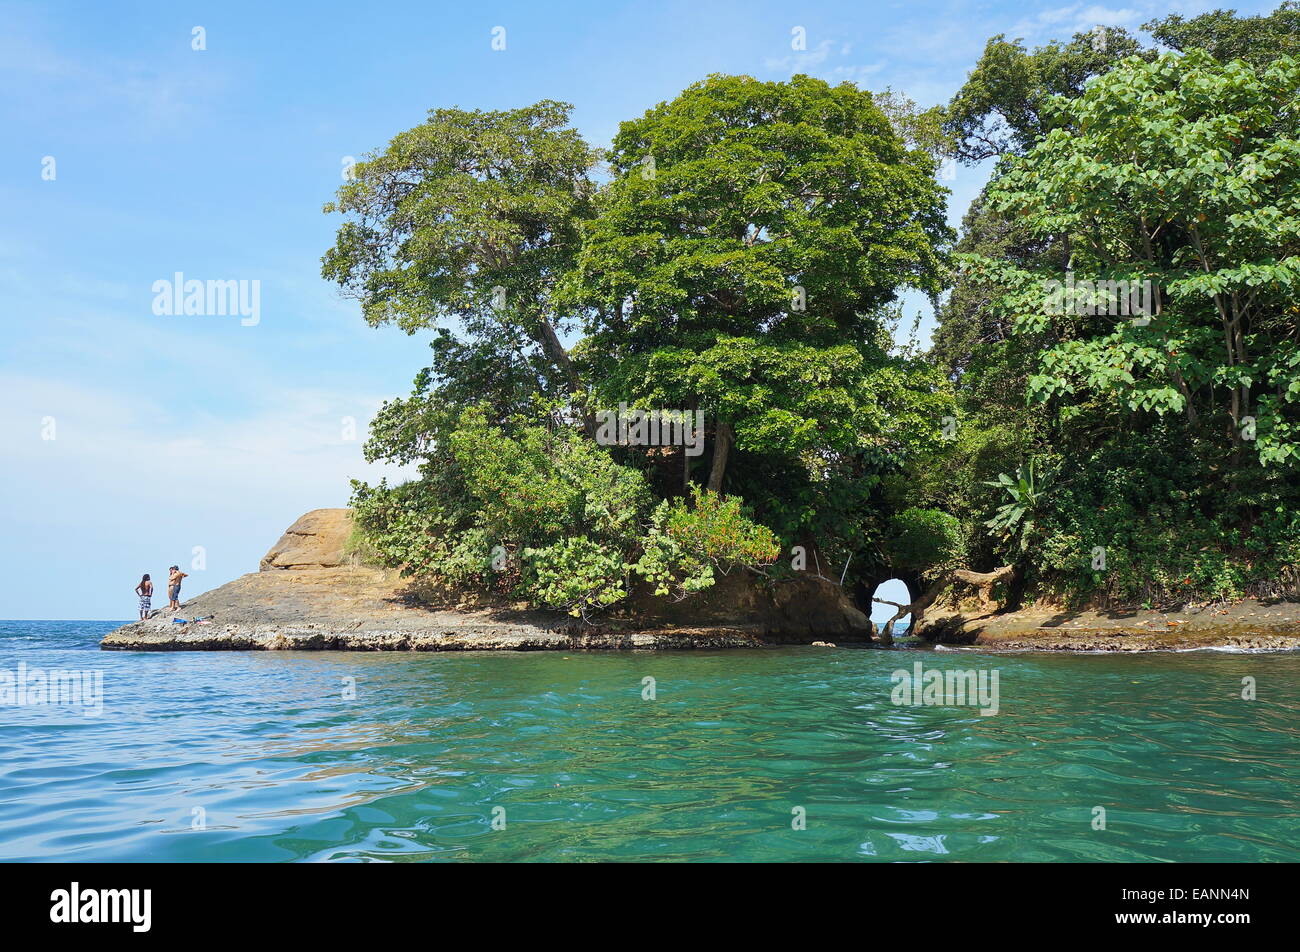 Caribbean shore of Costa Rica with a natural cave in the rock and lush tropical vegetation, Punta uva, Puerto Viejo Stock Photo